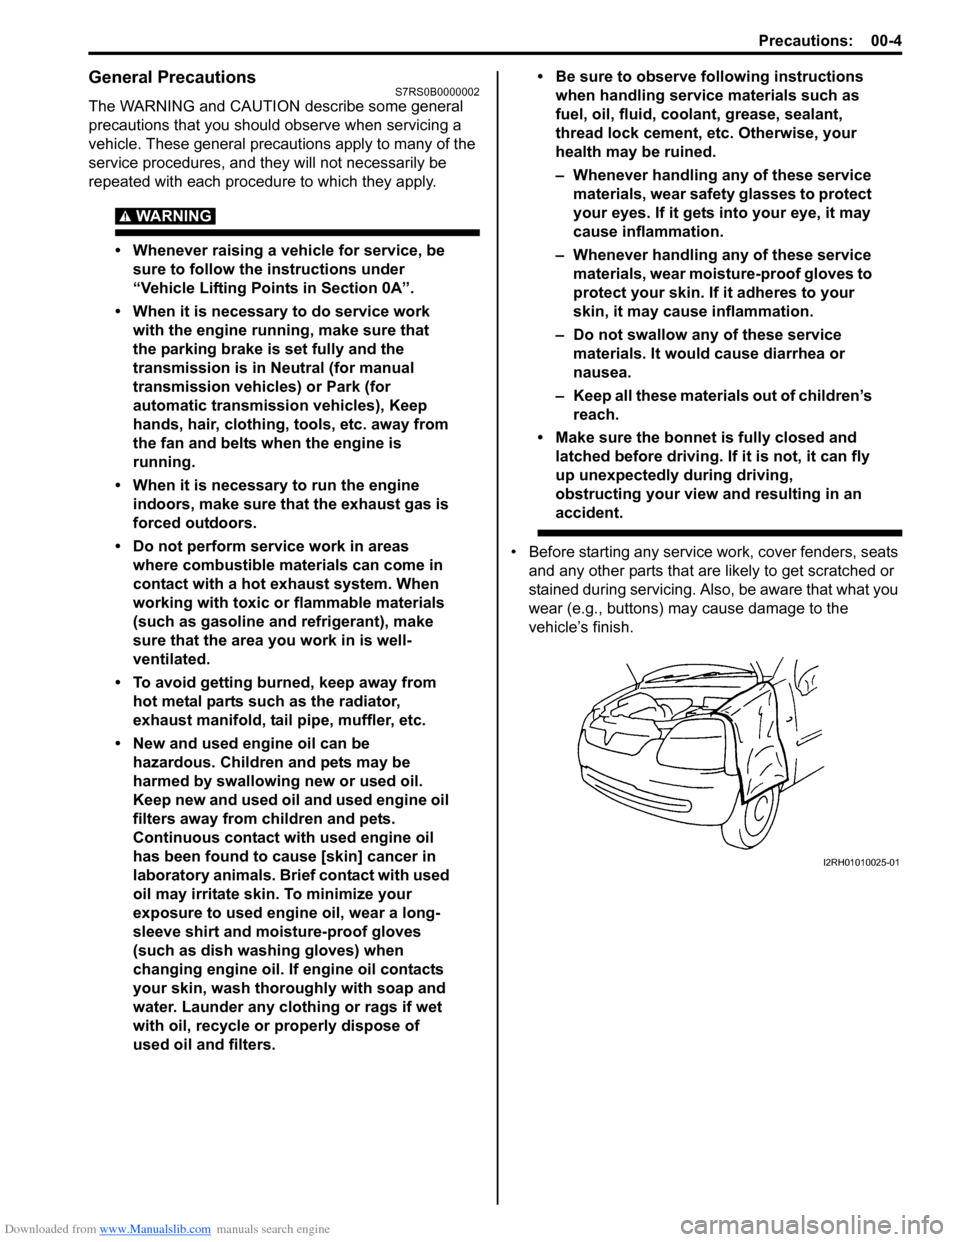 SUZUKI SWIFT 2007 2.G Service Workshop Manual Downloaded from www.Manualslib.com manuals search engine Precautions: 00-4
General PrecautionsS7RS0B0000002
The WARNING and CAUTION describe some general 
precautions that you should observe when serv